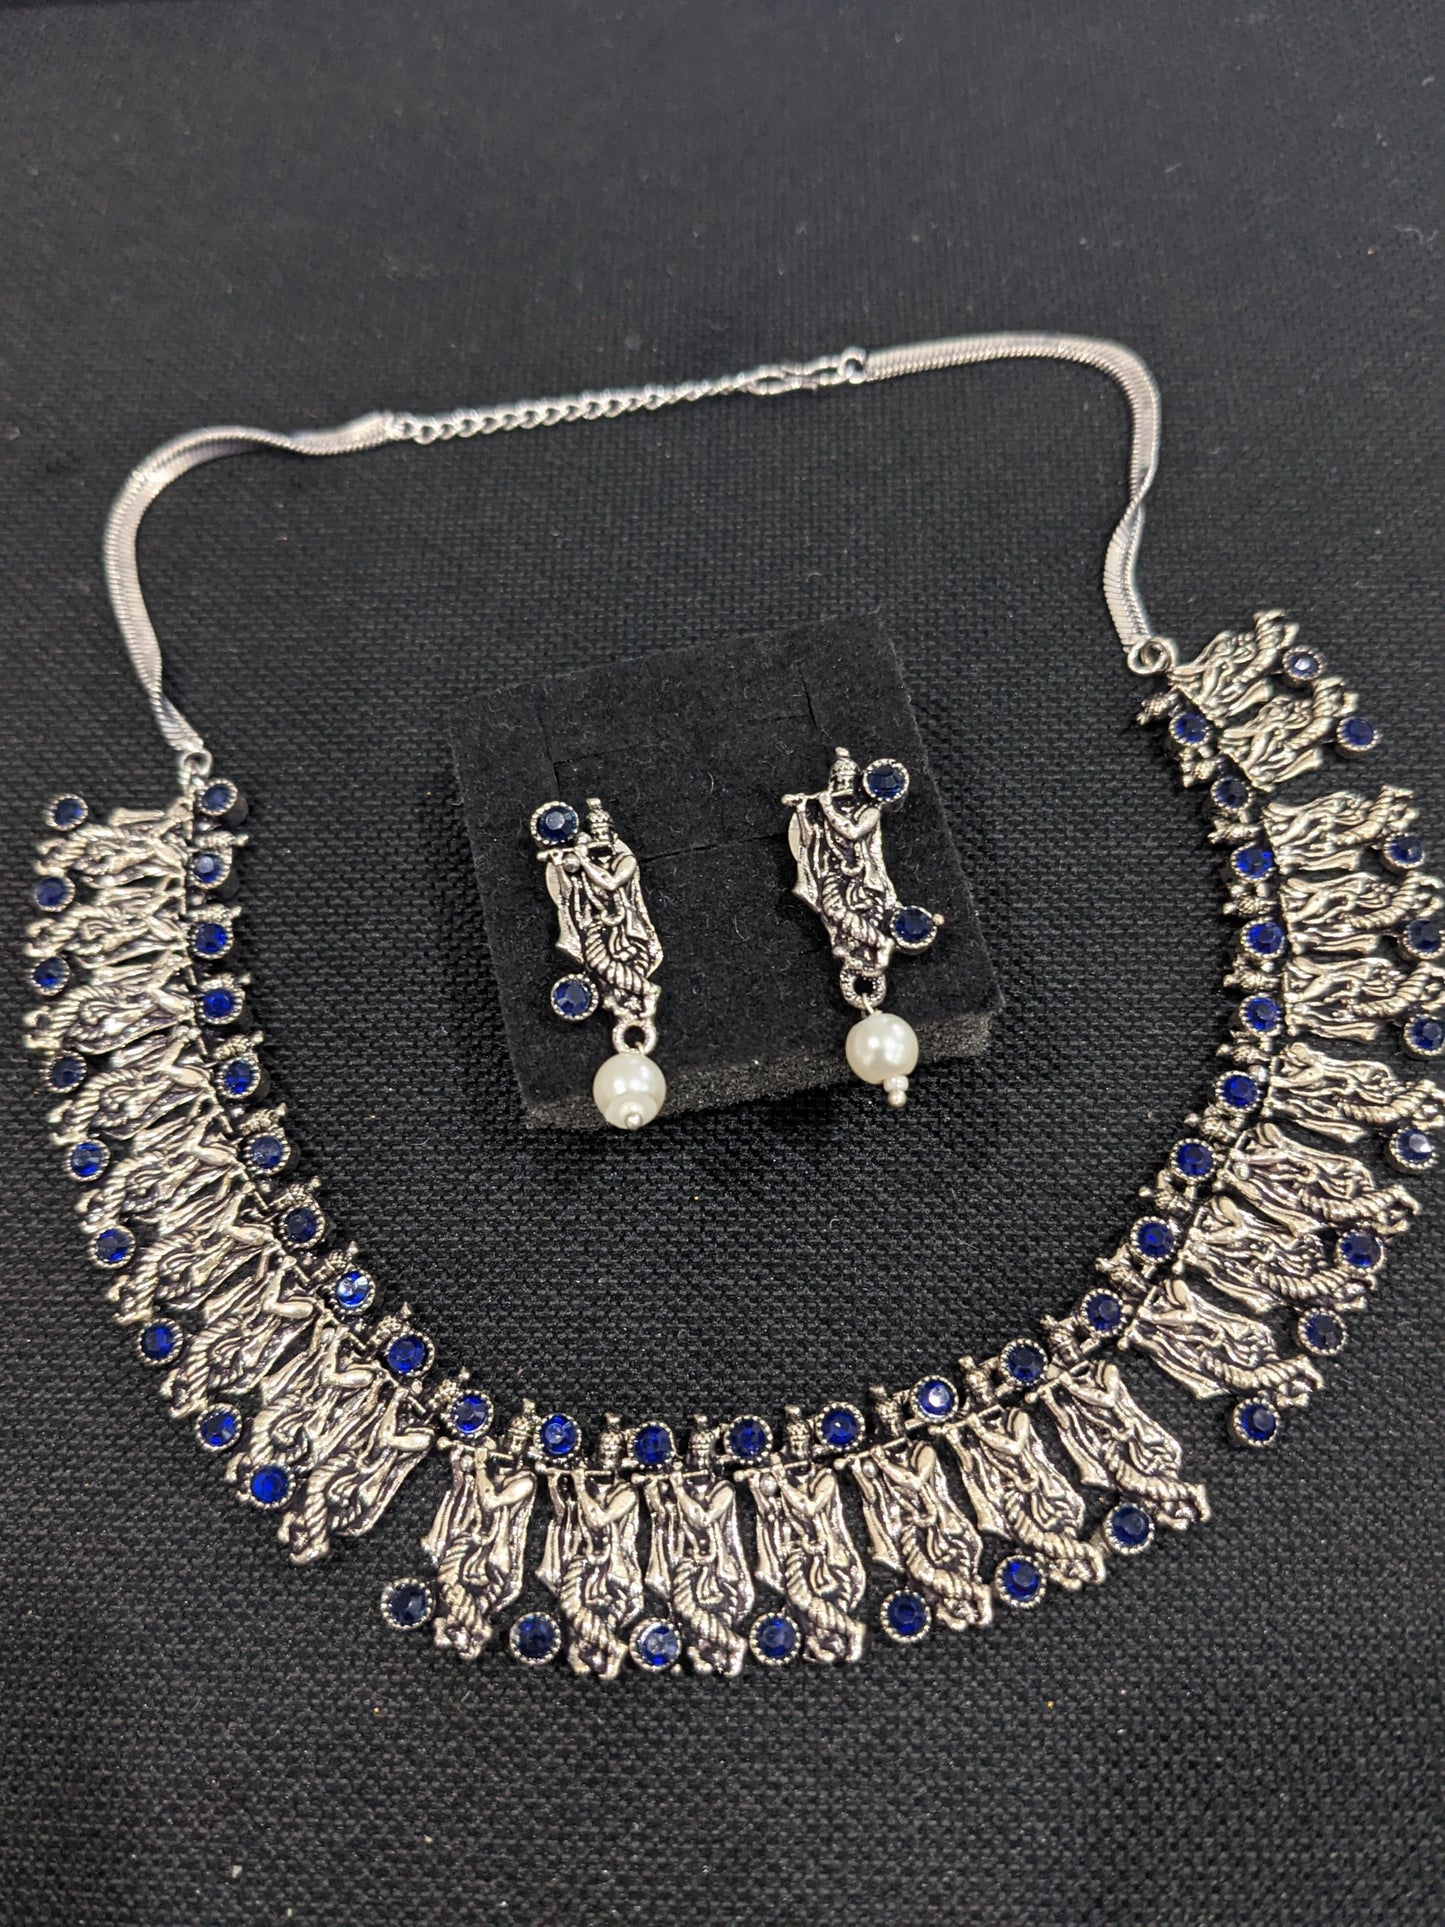 Oxidized Silver Lord Krishna Choker Necklace and Earring set